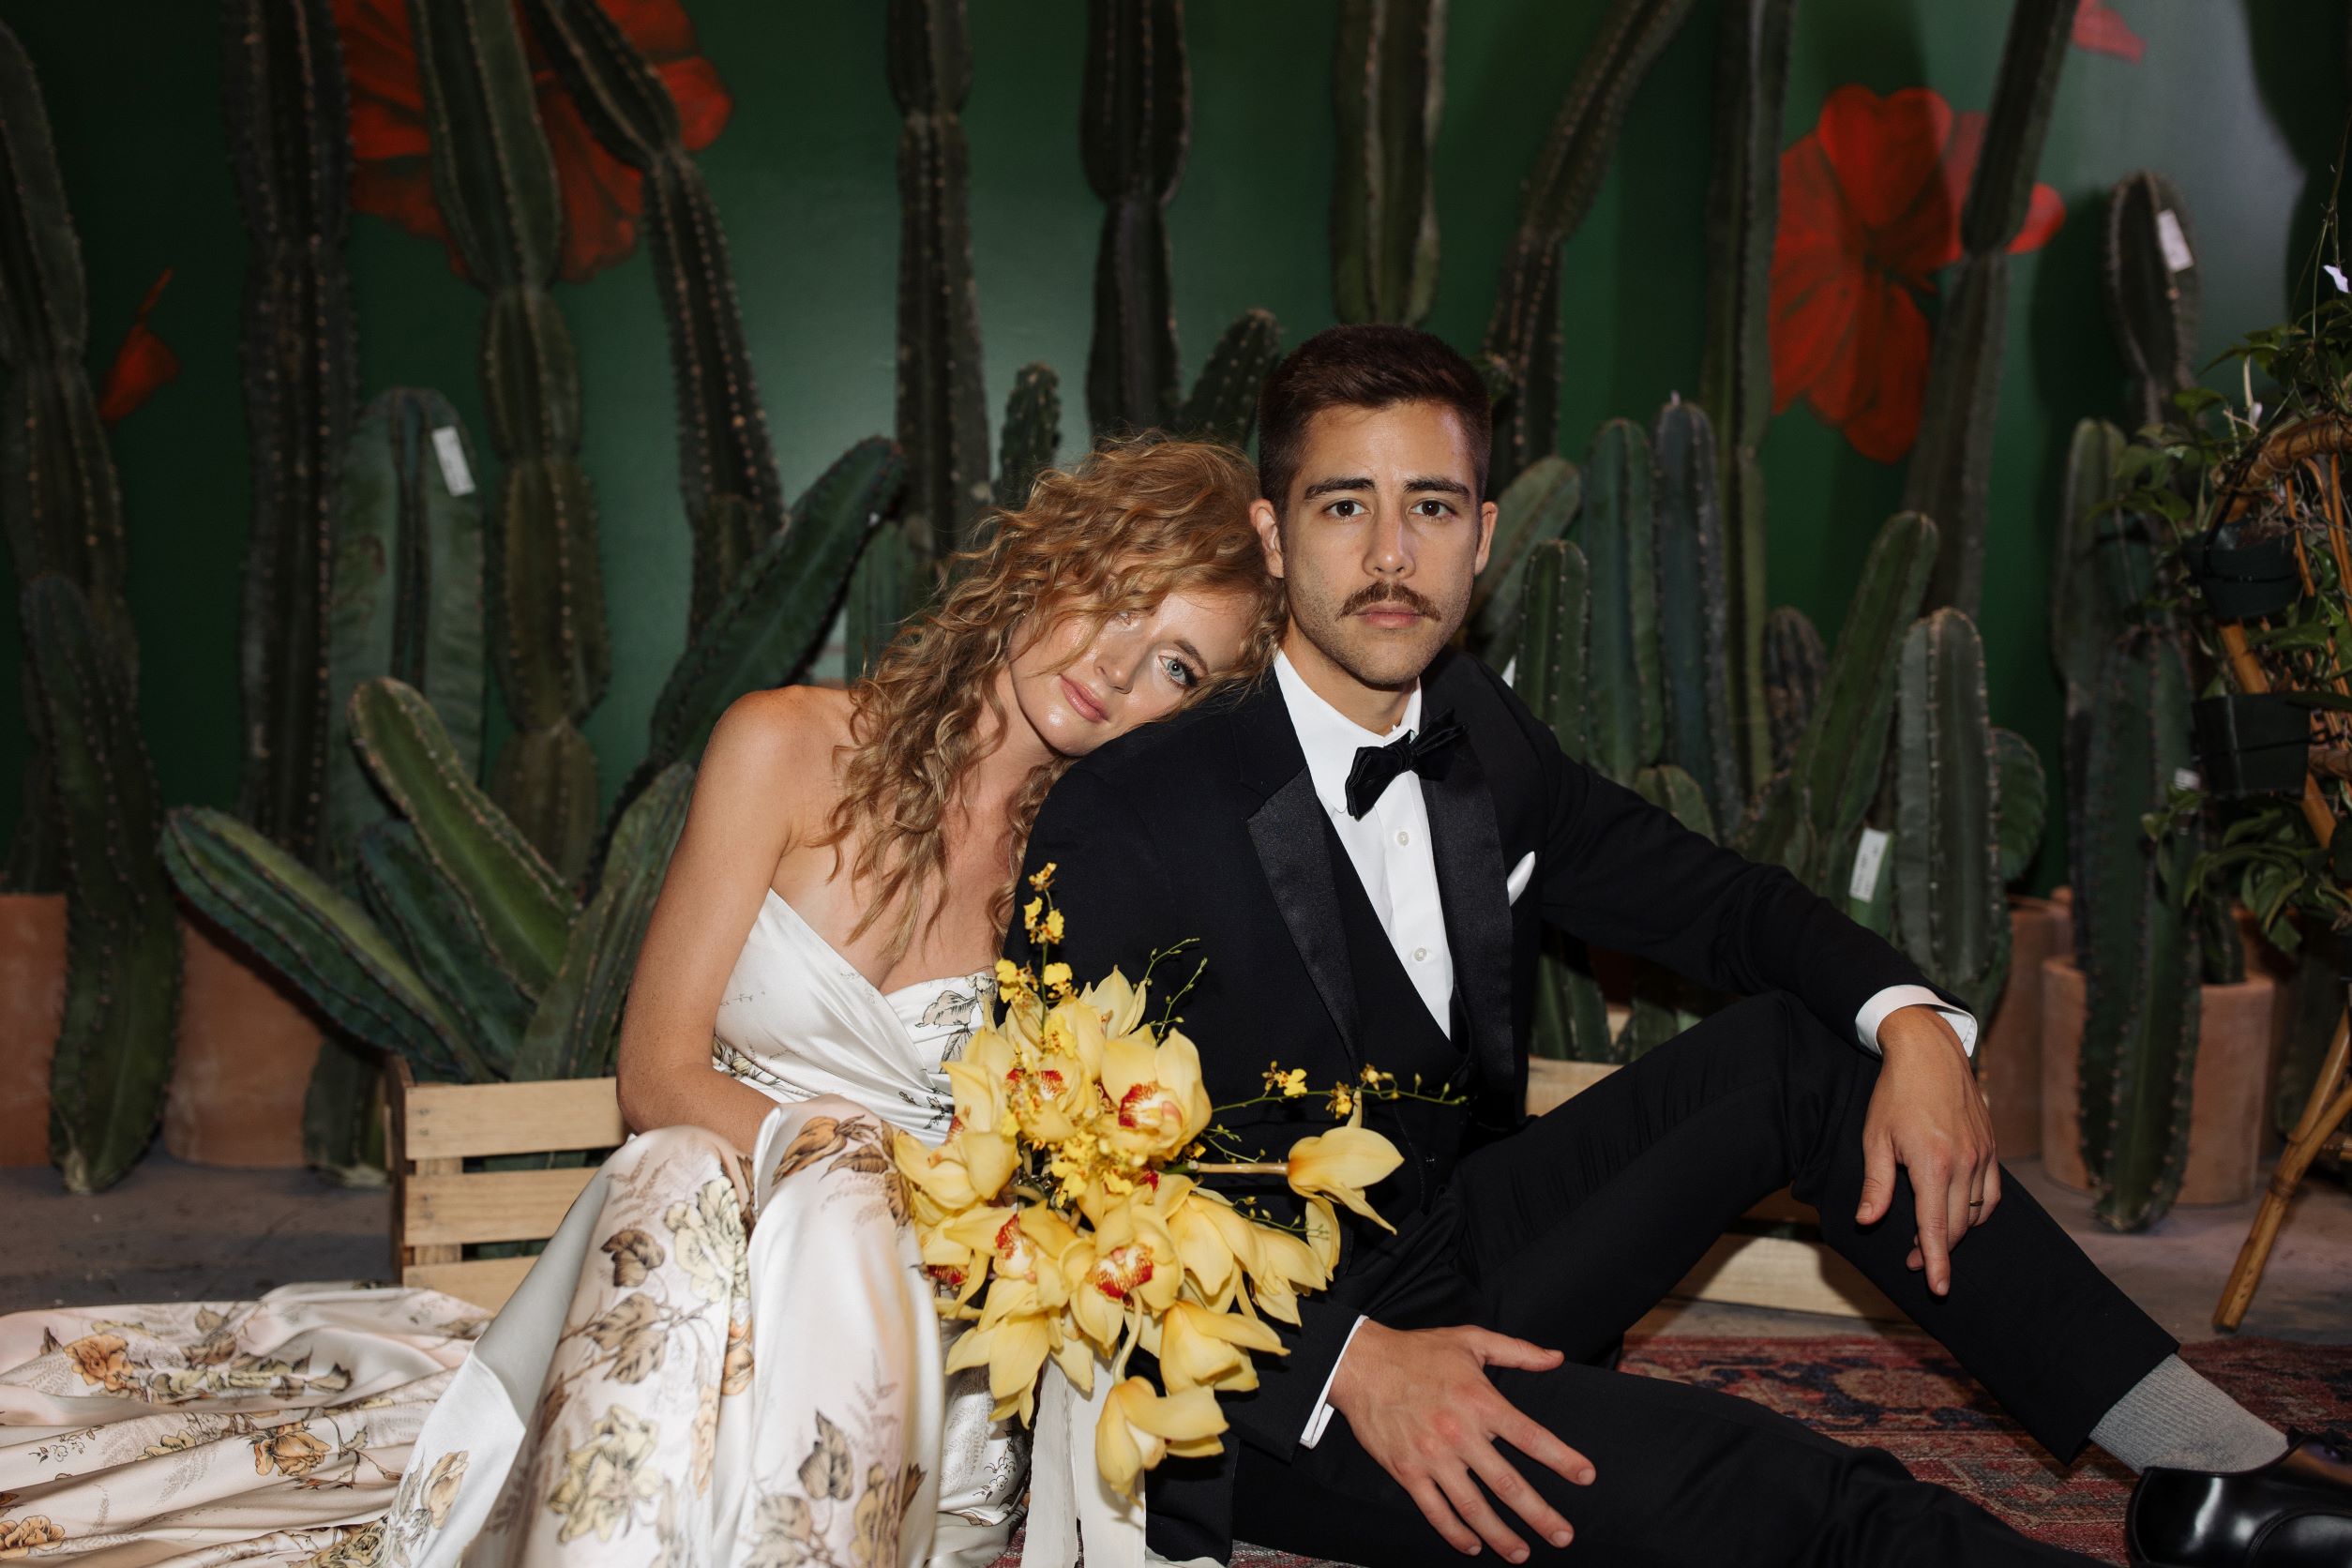 bride and groom sitting on floor, groom in black tux, bride holding bouquet of yellow flowers, behind them are cacti